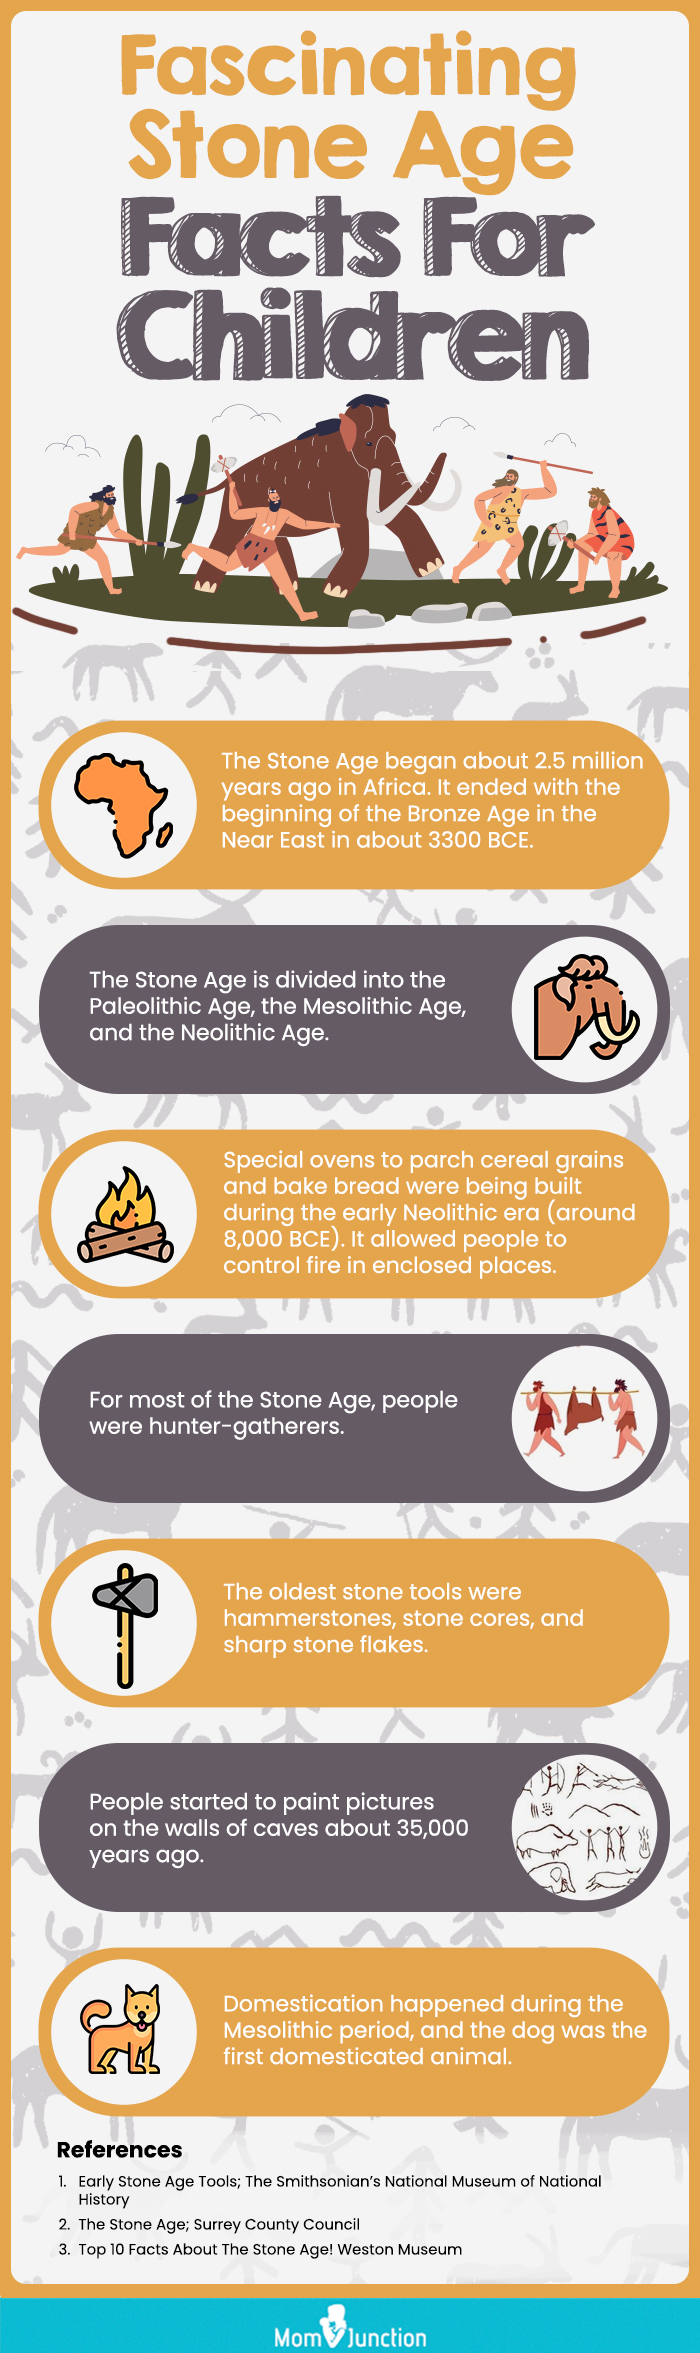 fascinating stone age facts for children (infographic)